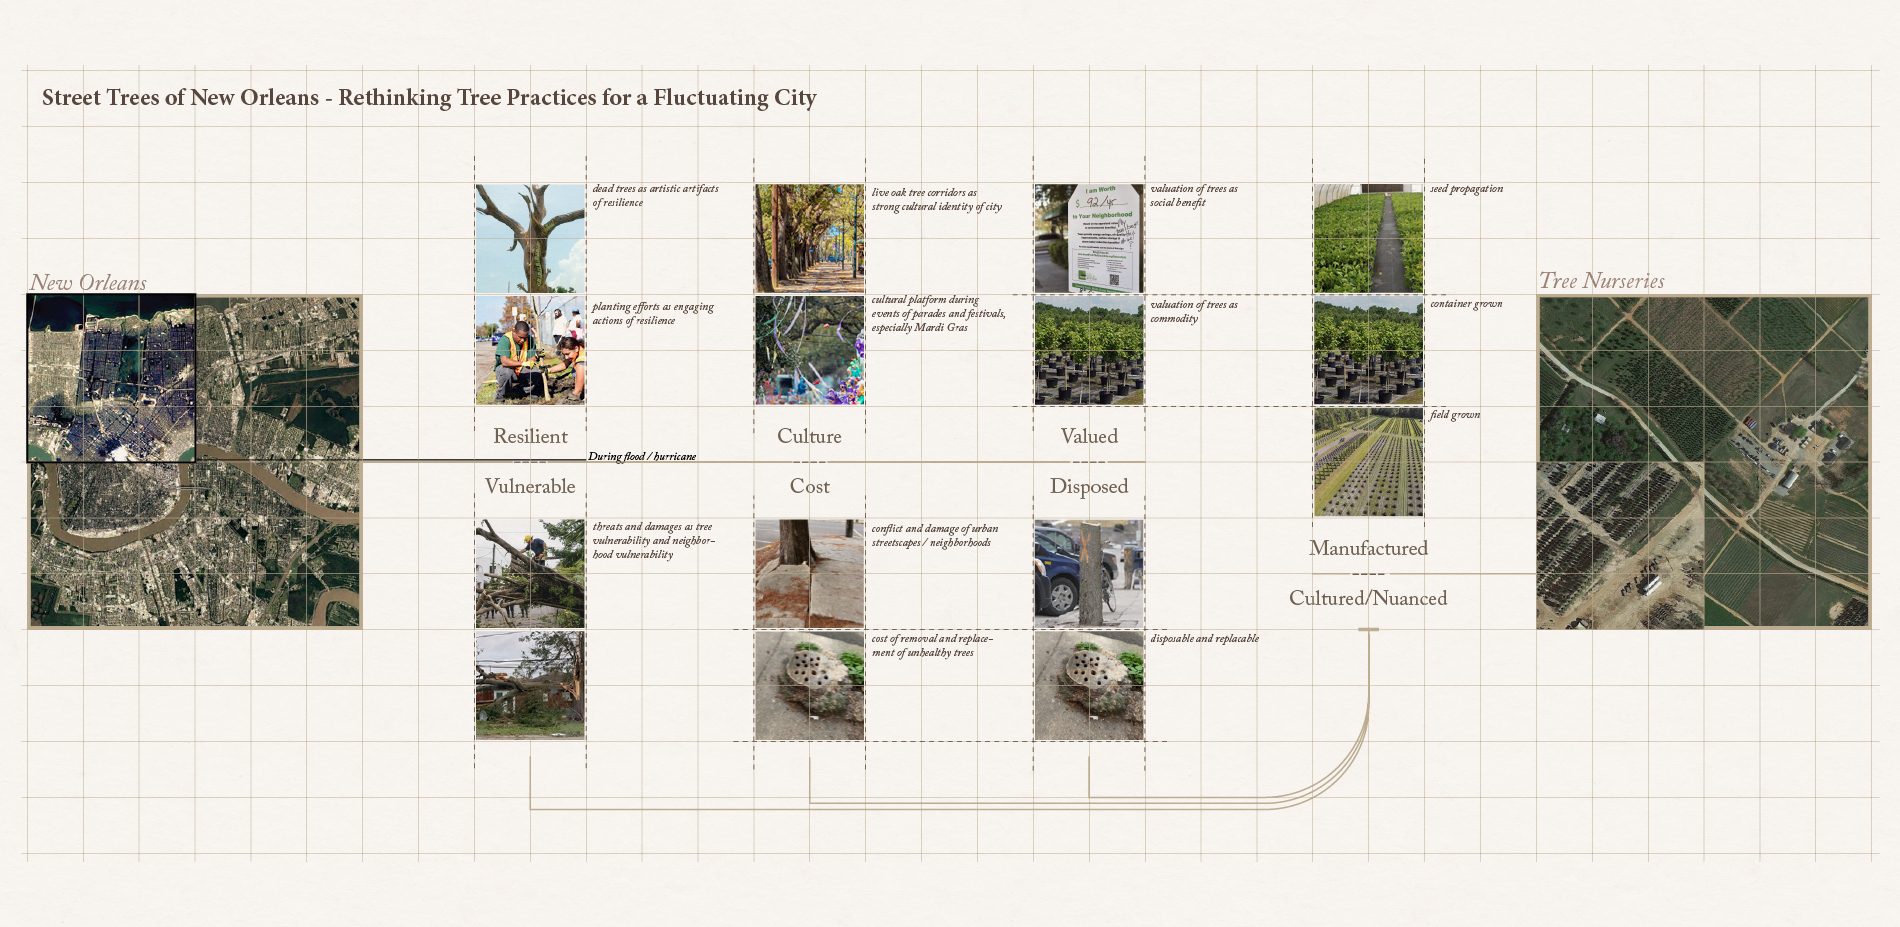 The Problem: Street Tree Practices in a Fluctuating City